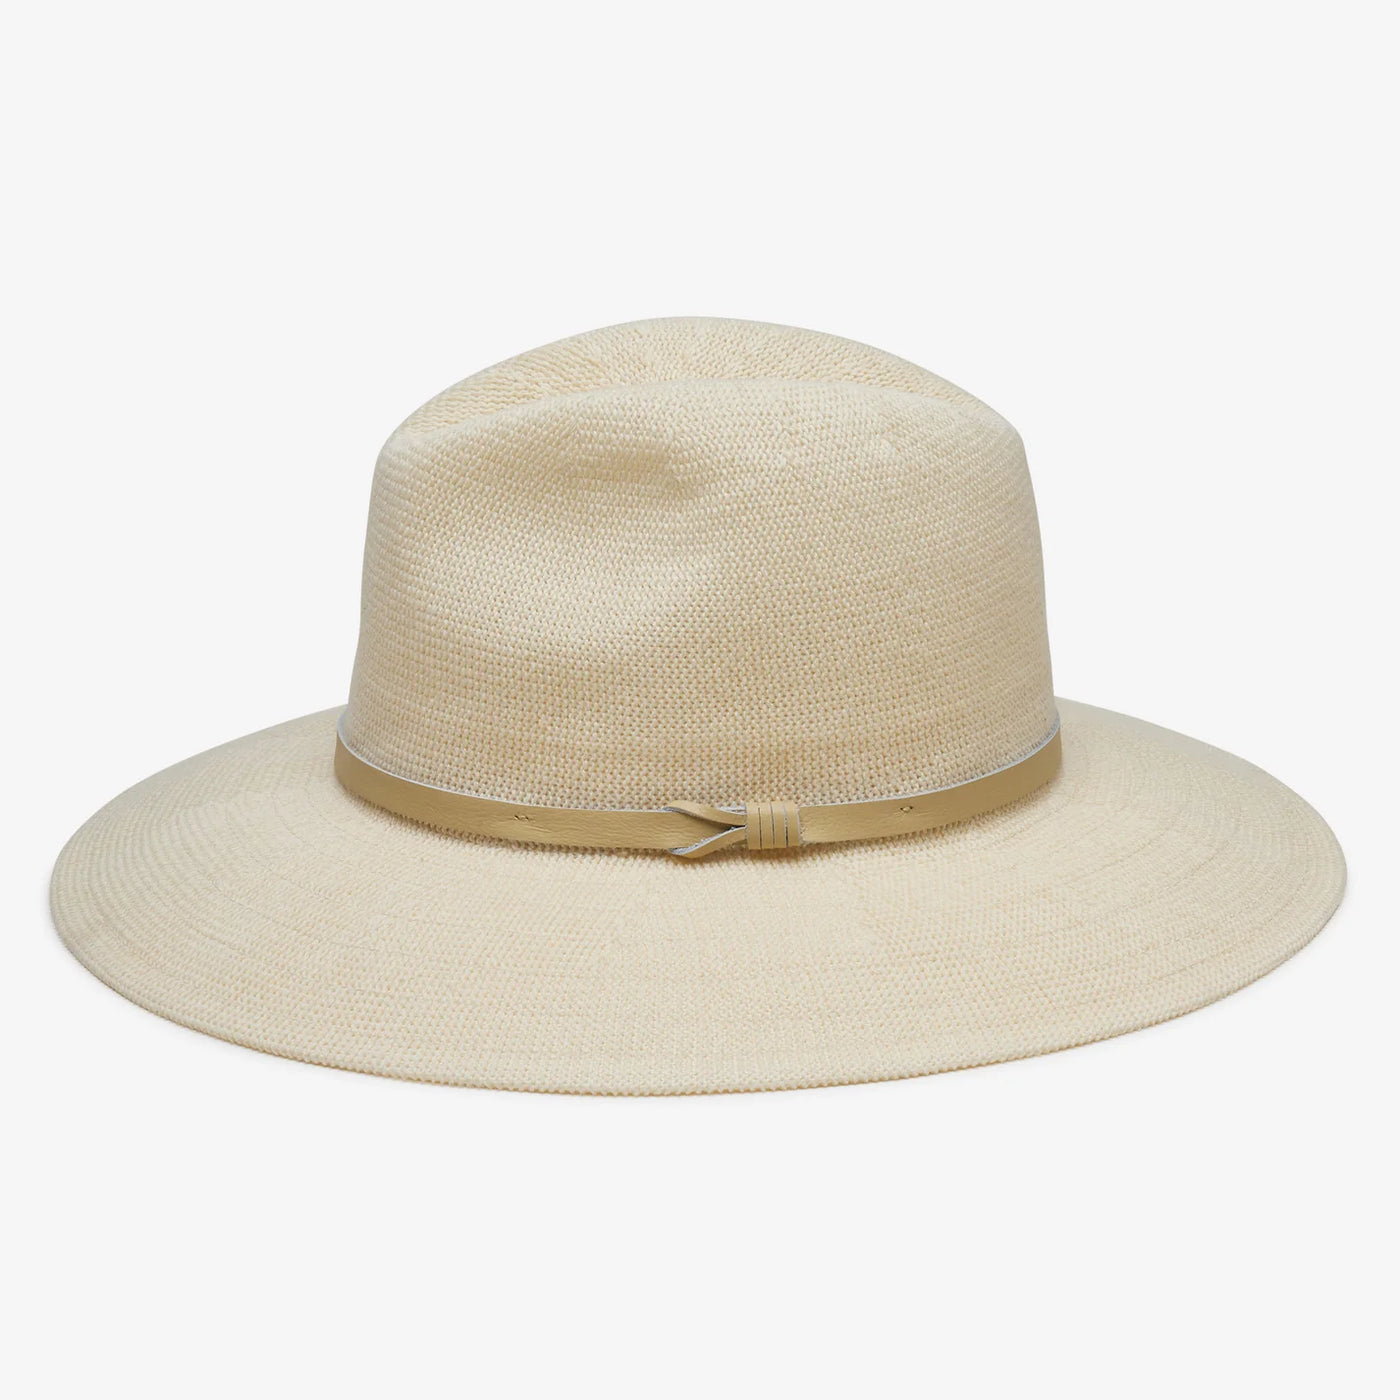 WINONA HAT IN IVORY - Romi Boutique